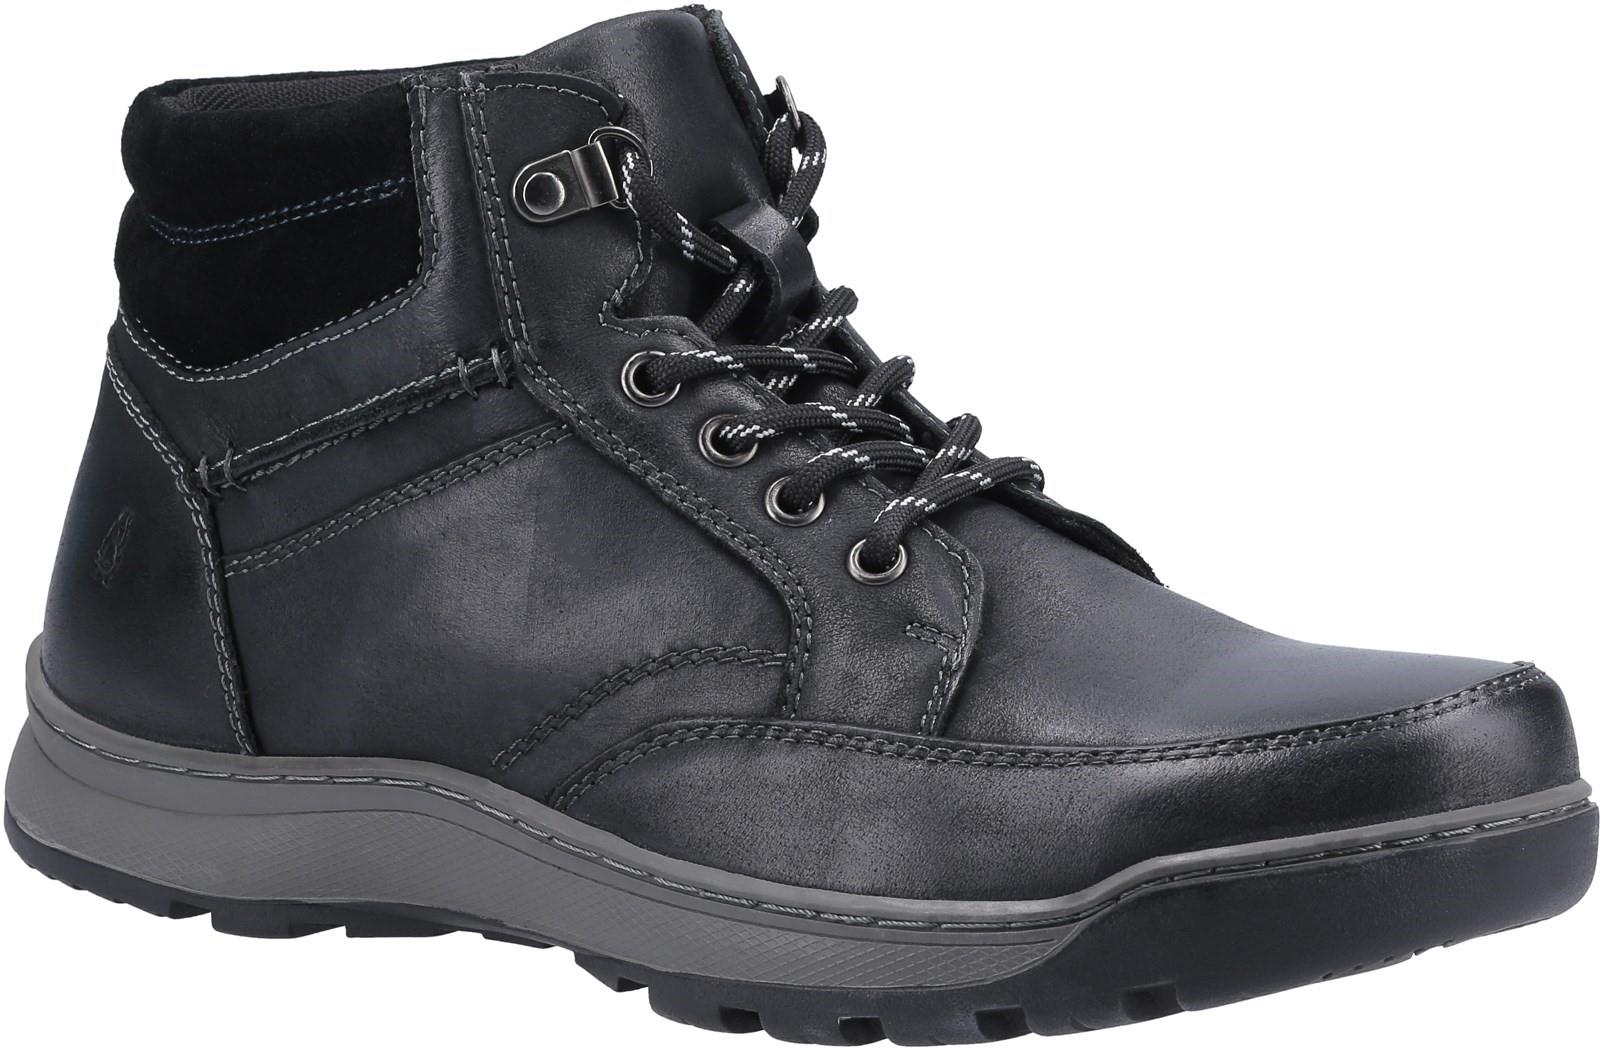 Hush Puppies Grover black leather memory foam breathable lace up boots